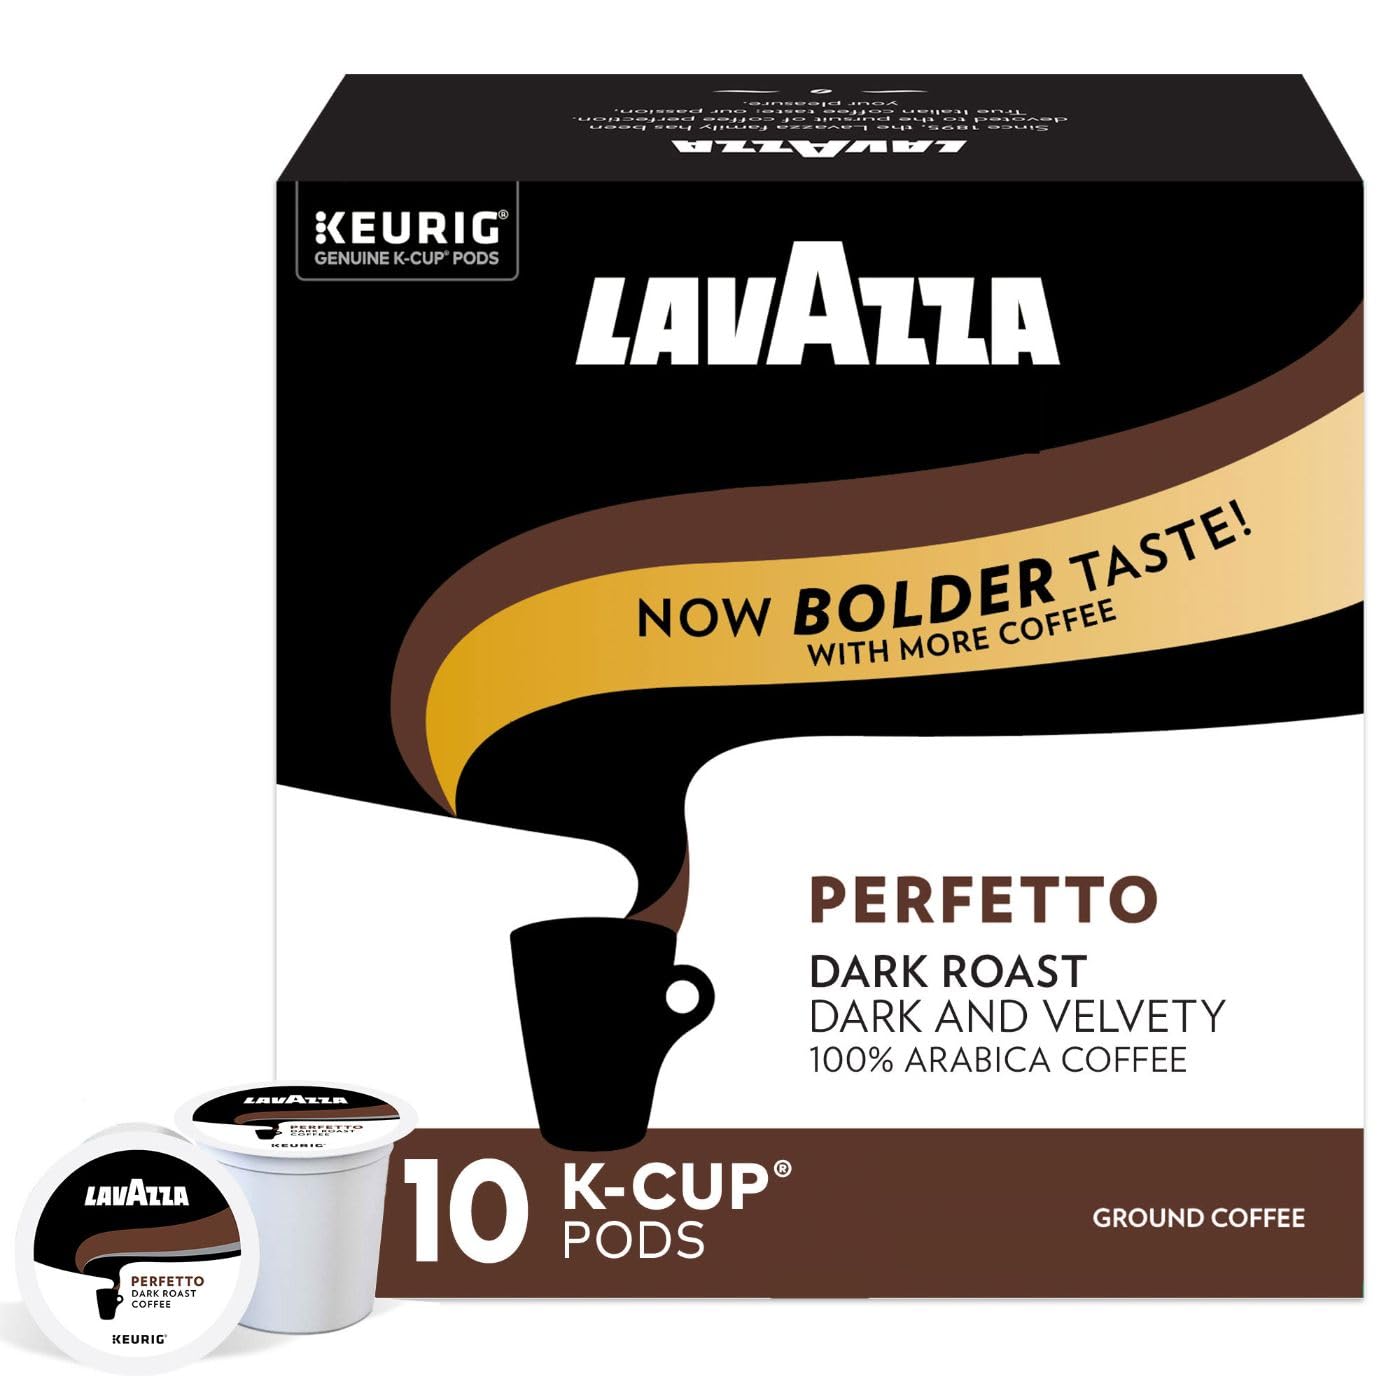 This is our favorite coffee. It is strong and great tasting.